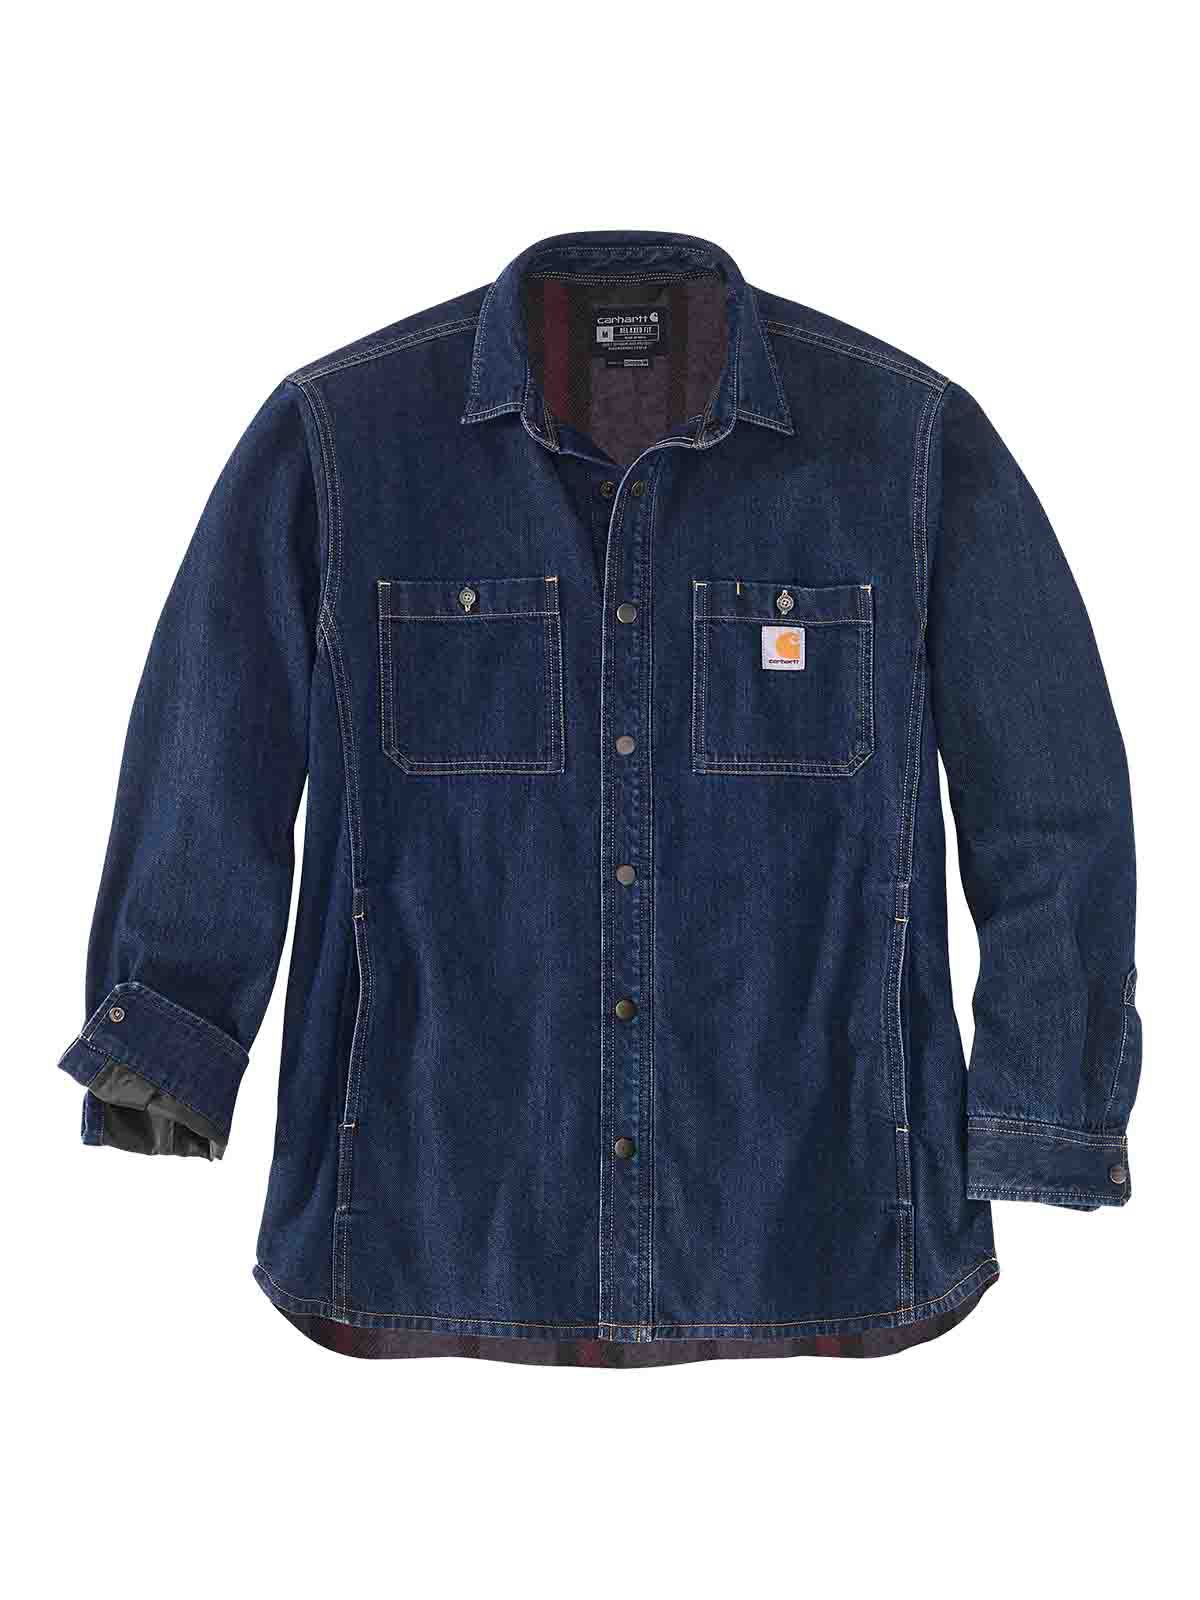 RELAXED FIT DENIM FLEECE LINED SNAP-FRONT SHIRT 105605-H84